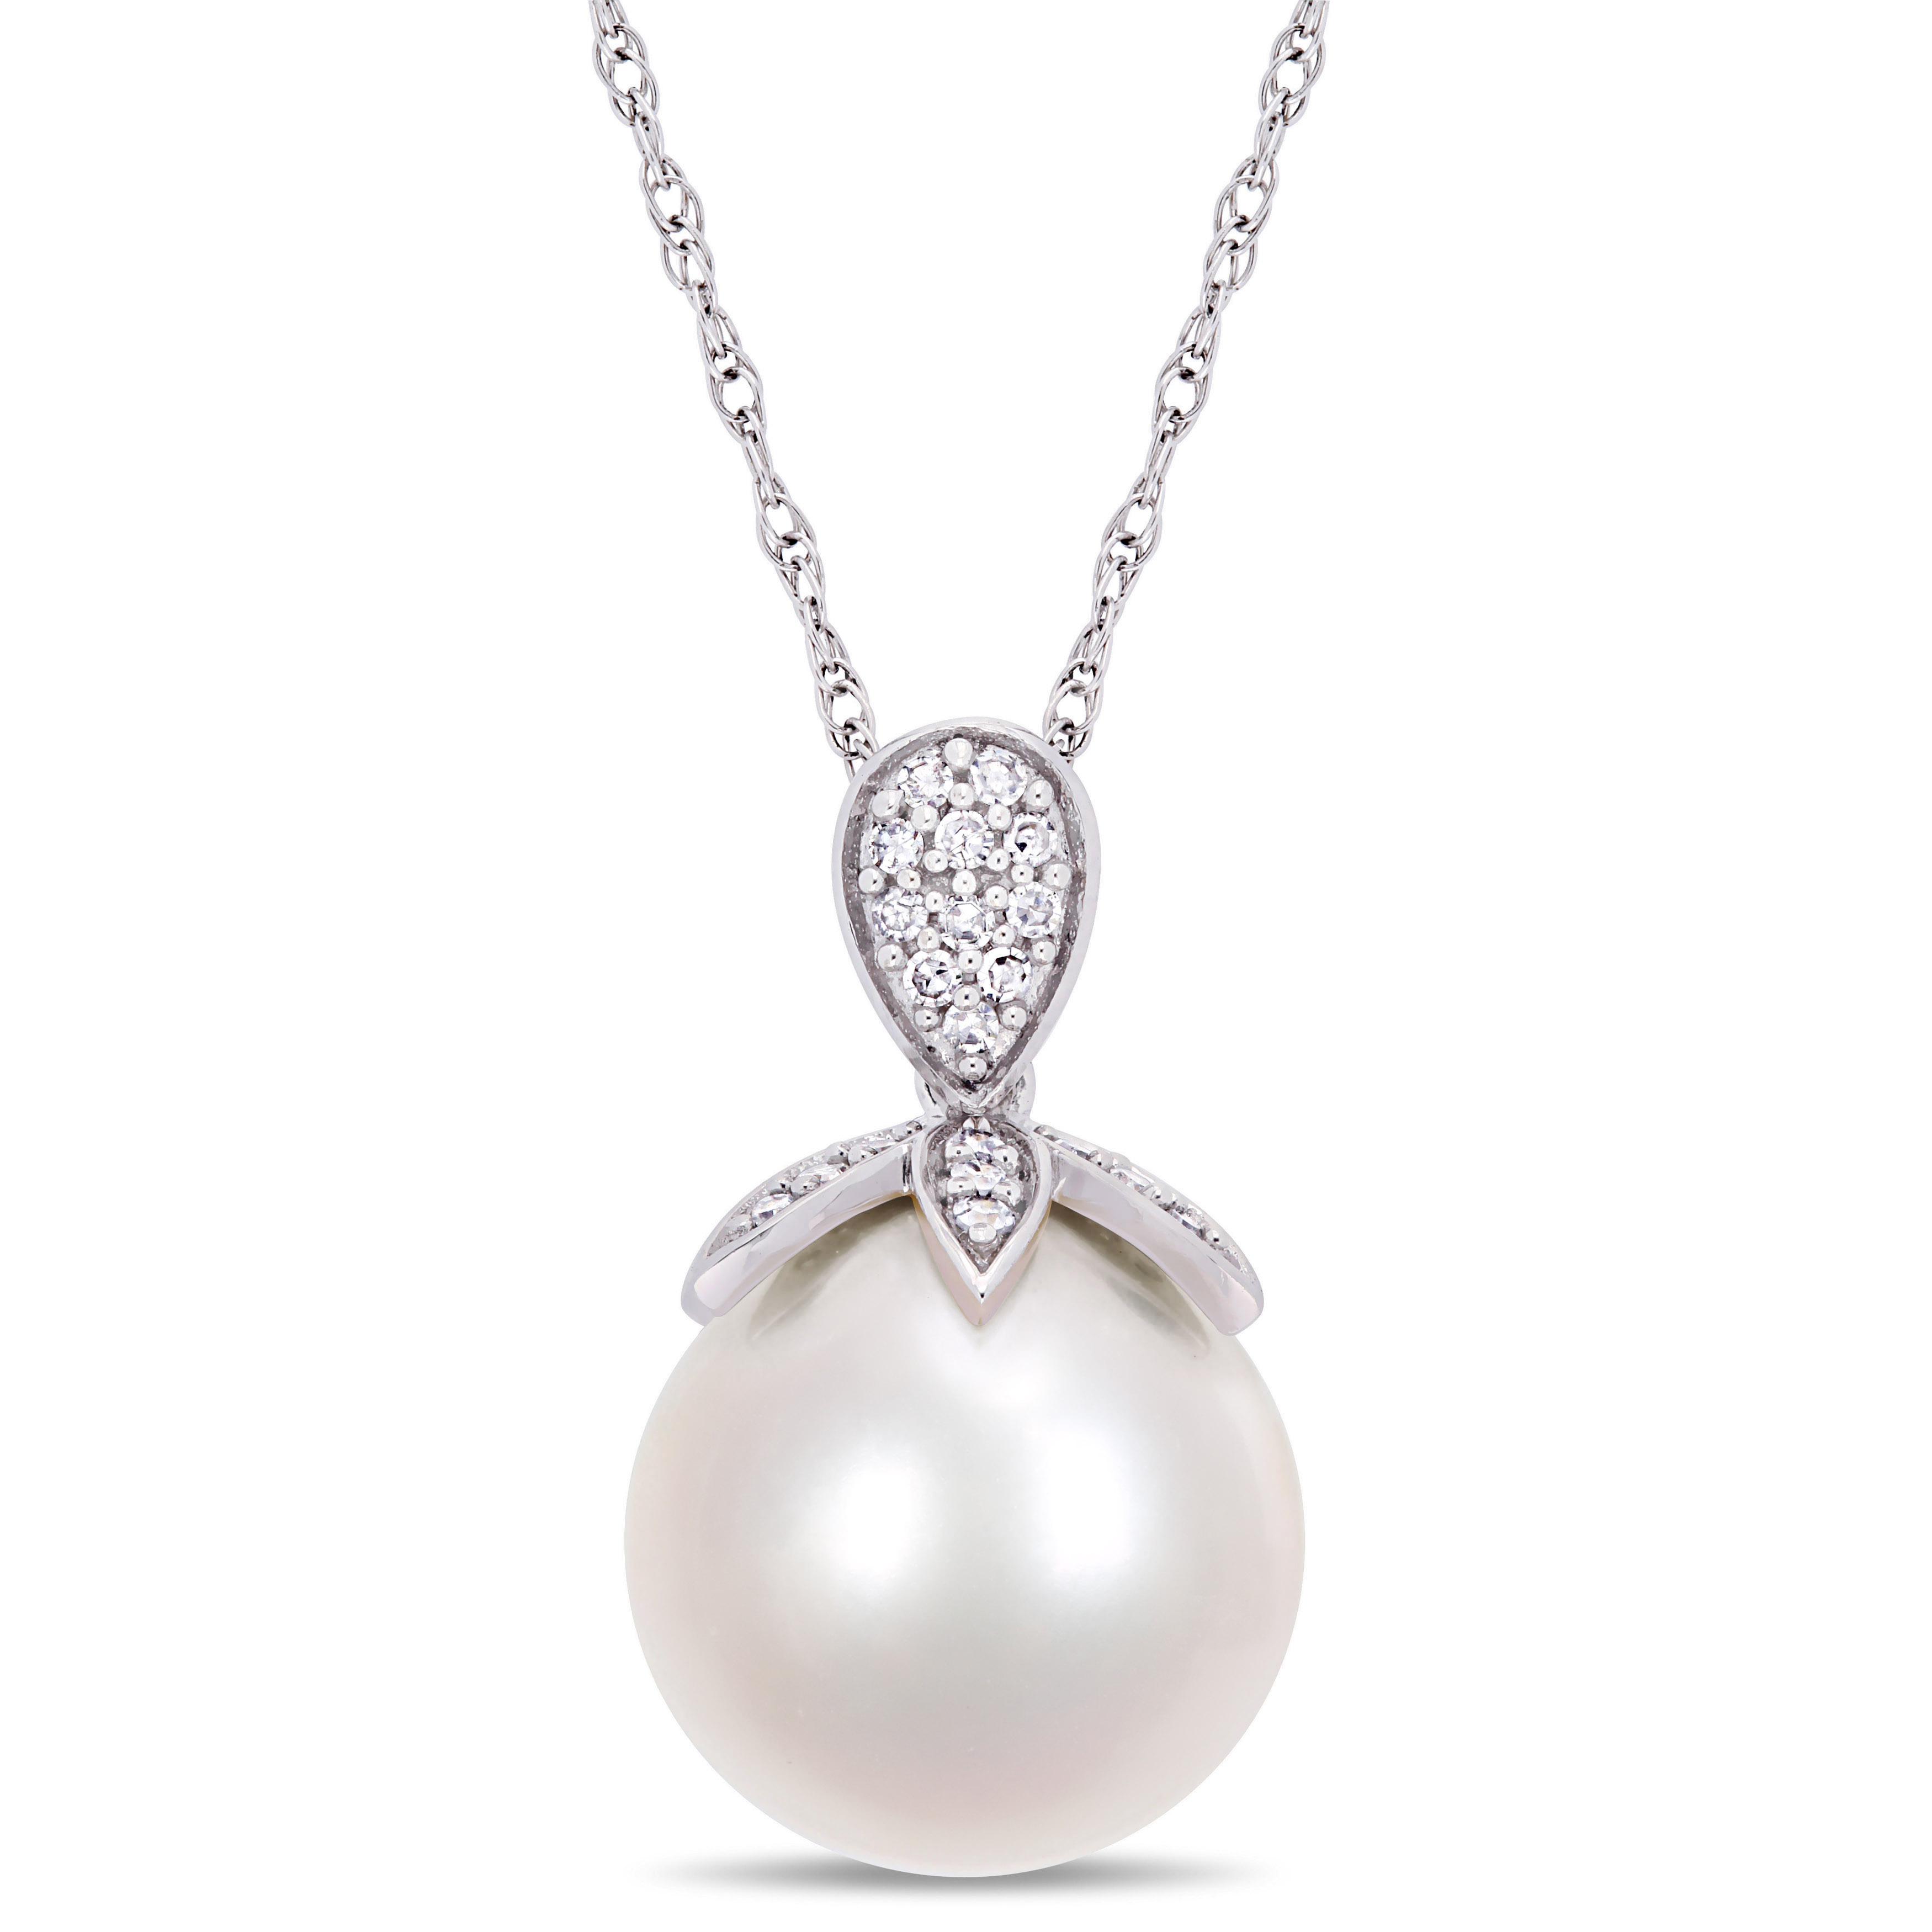 11-12 MM Cultured Freshwater Pearl and 1/10 CT TW Diamond Pendant with Chain in 10k White Gold